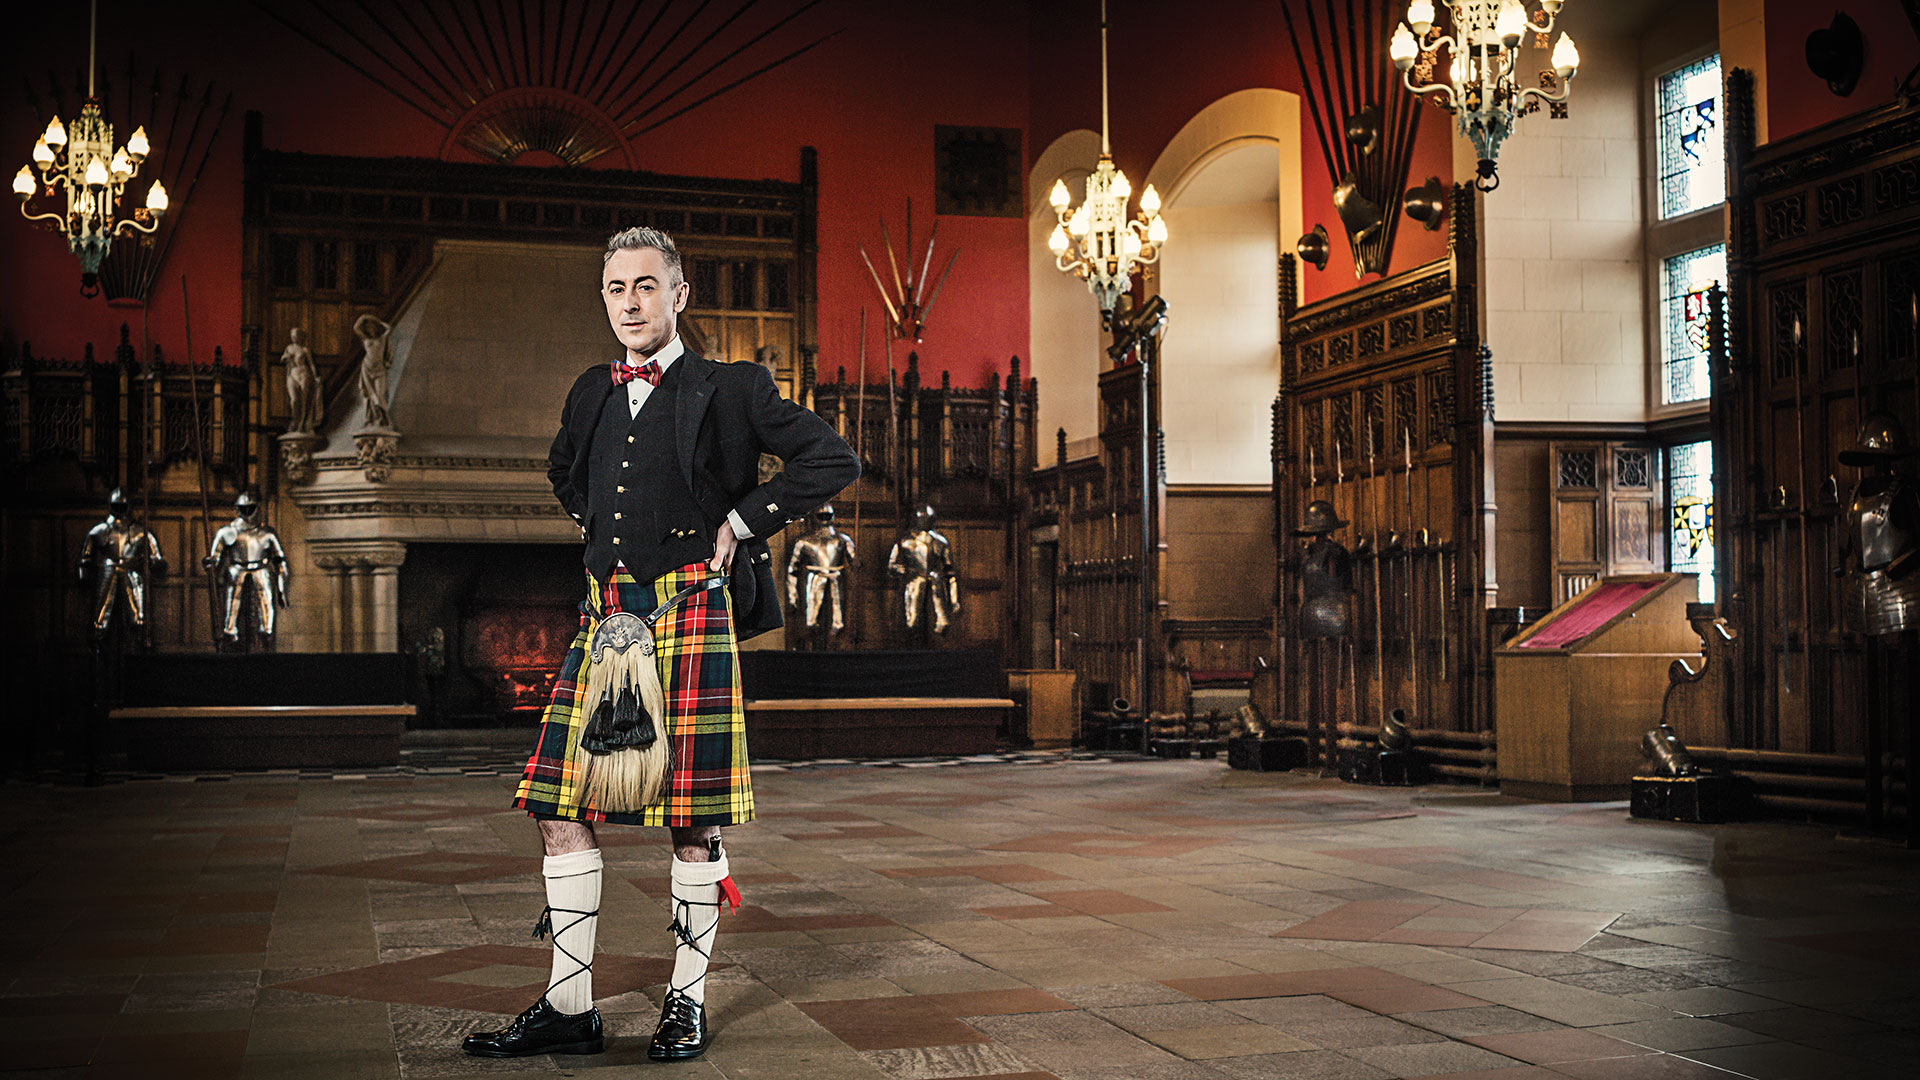 It's easy to have a bonny good time with this great Scot. Check out these cool photos of Alan Cumming in Edinburgh!